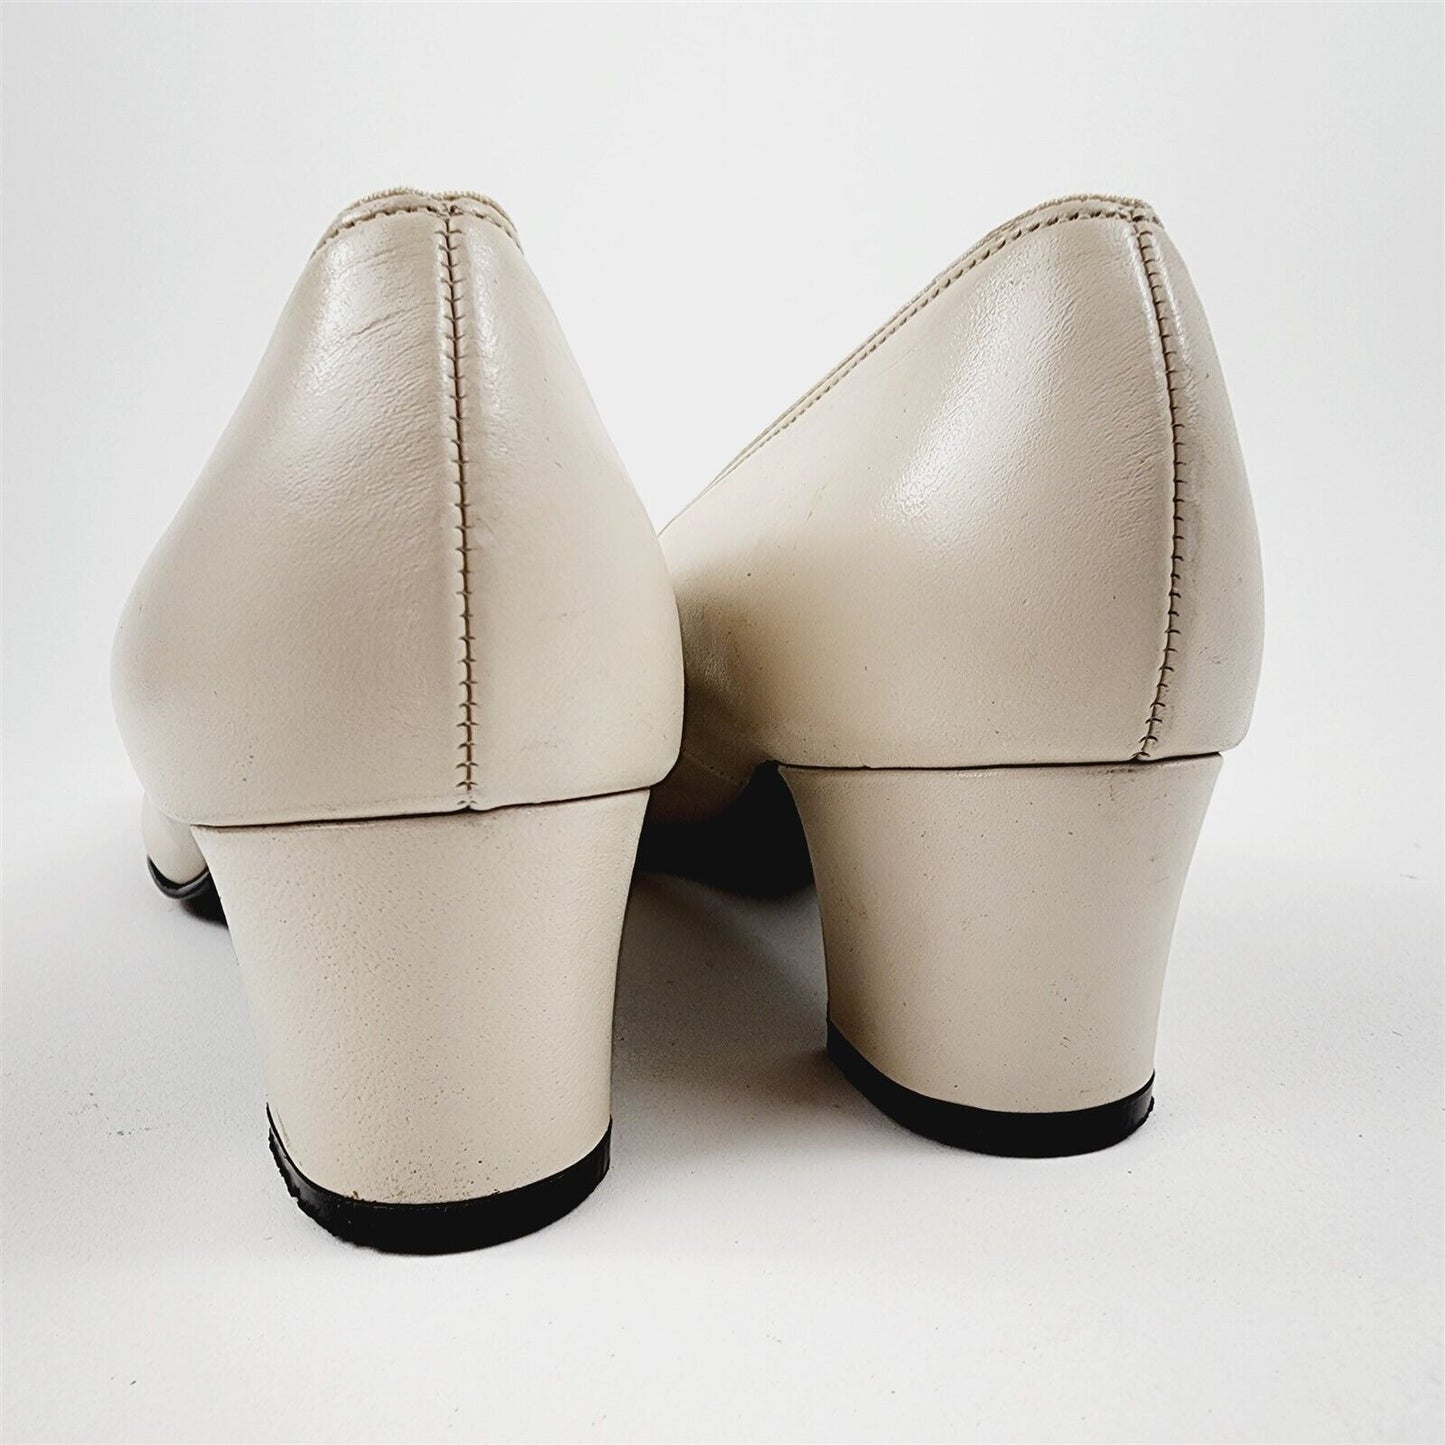 Vintage Selby Beige Gray Leather Pumps Heels Shoes Womens Size 7.5